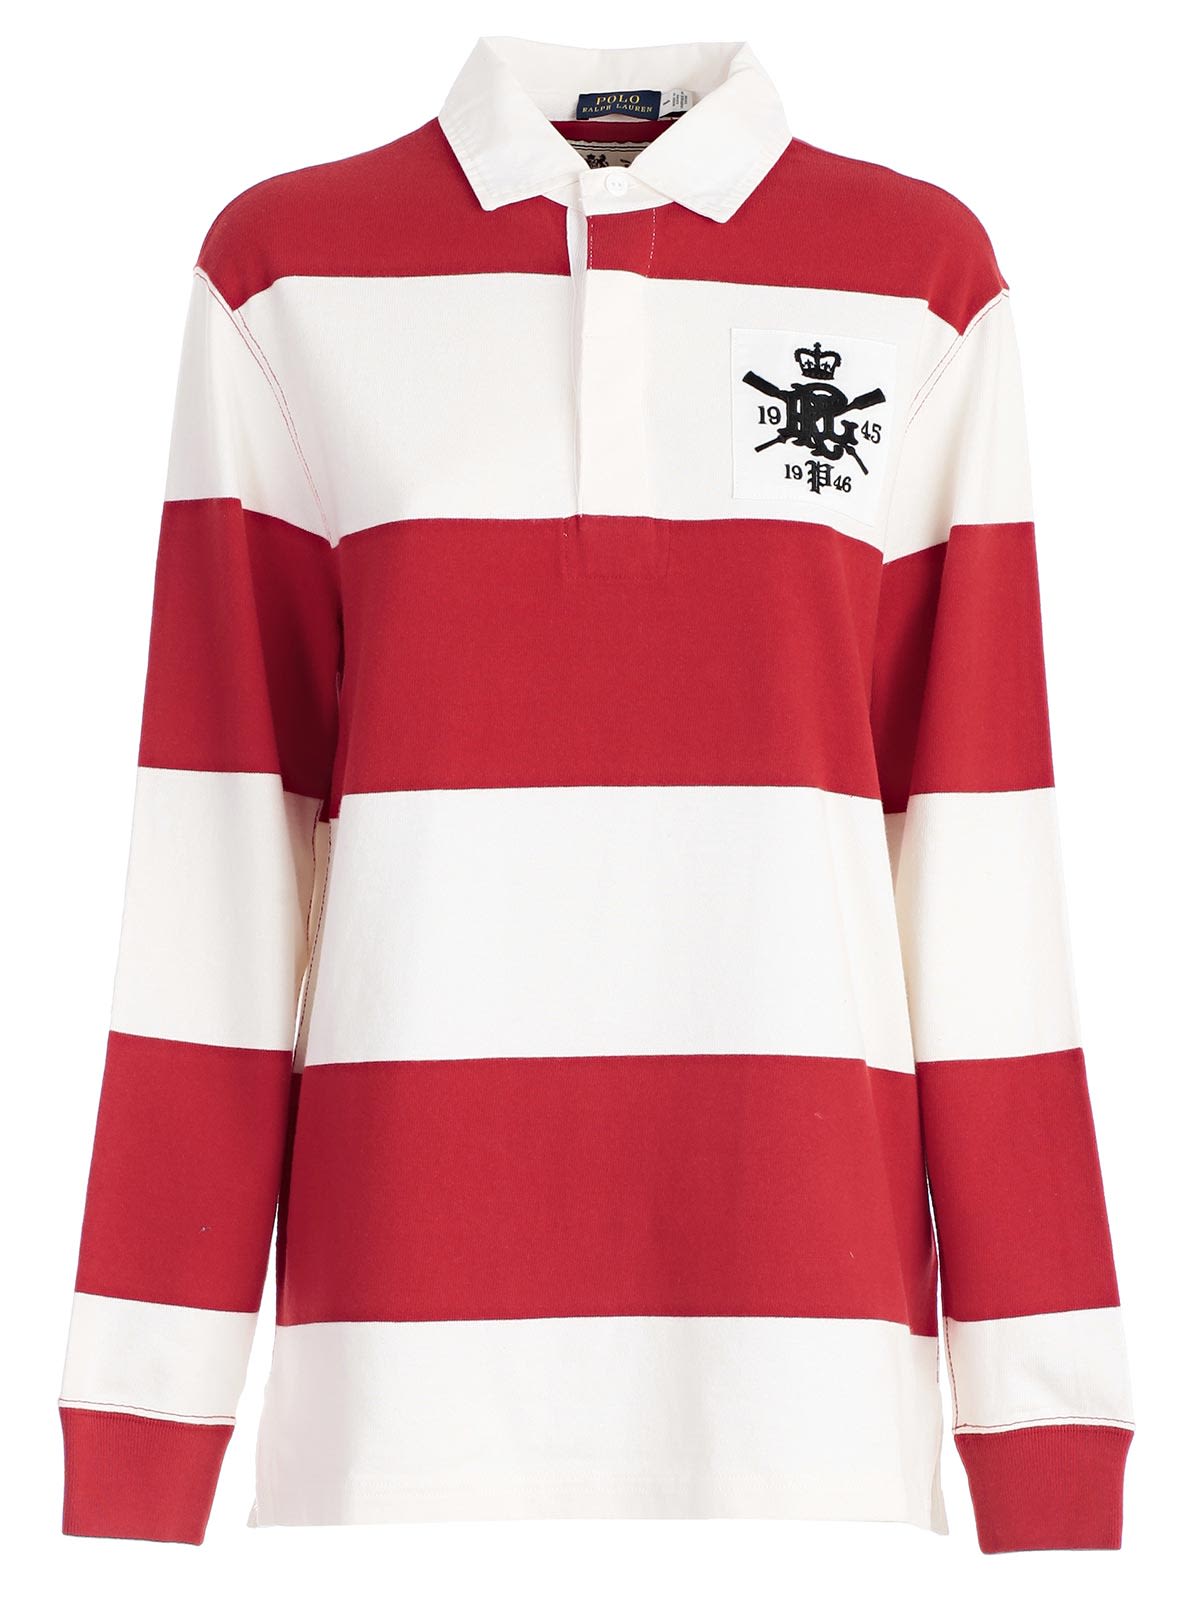 POLO RALPH LAUREN STRIPED RUGBY TOP,10630316